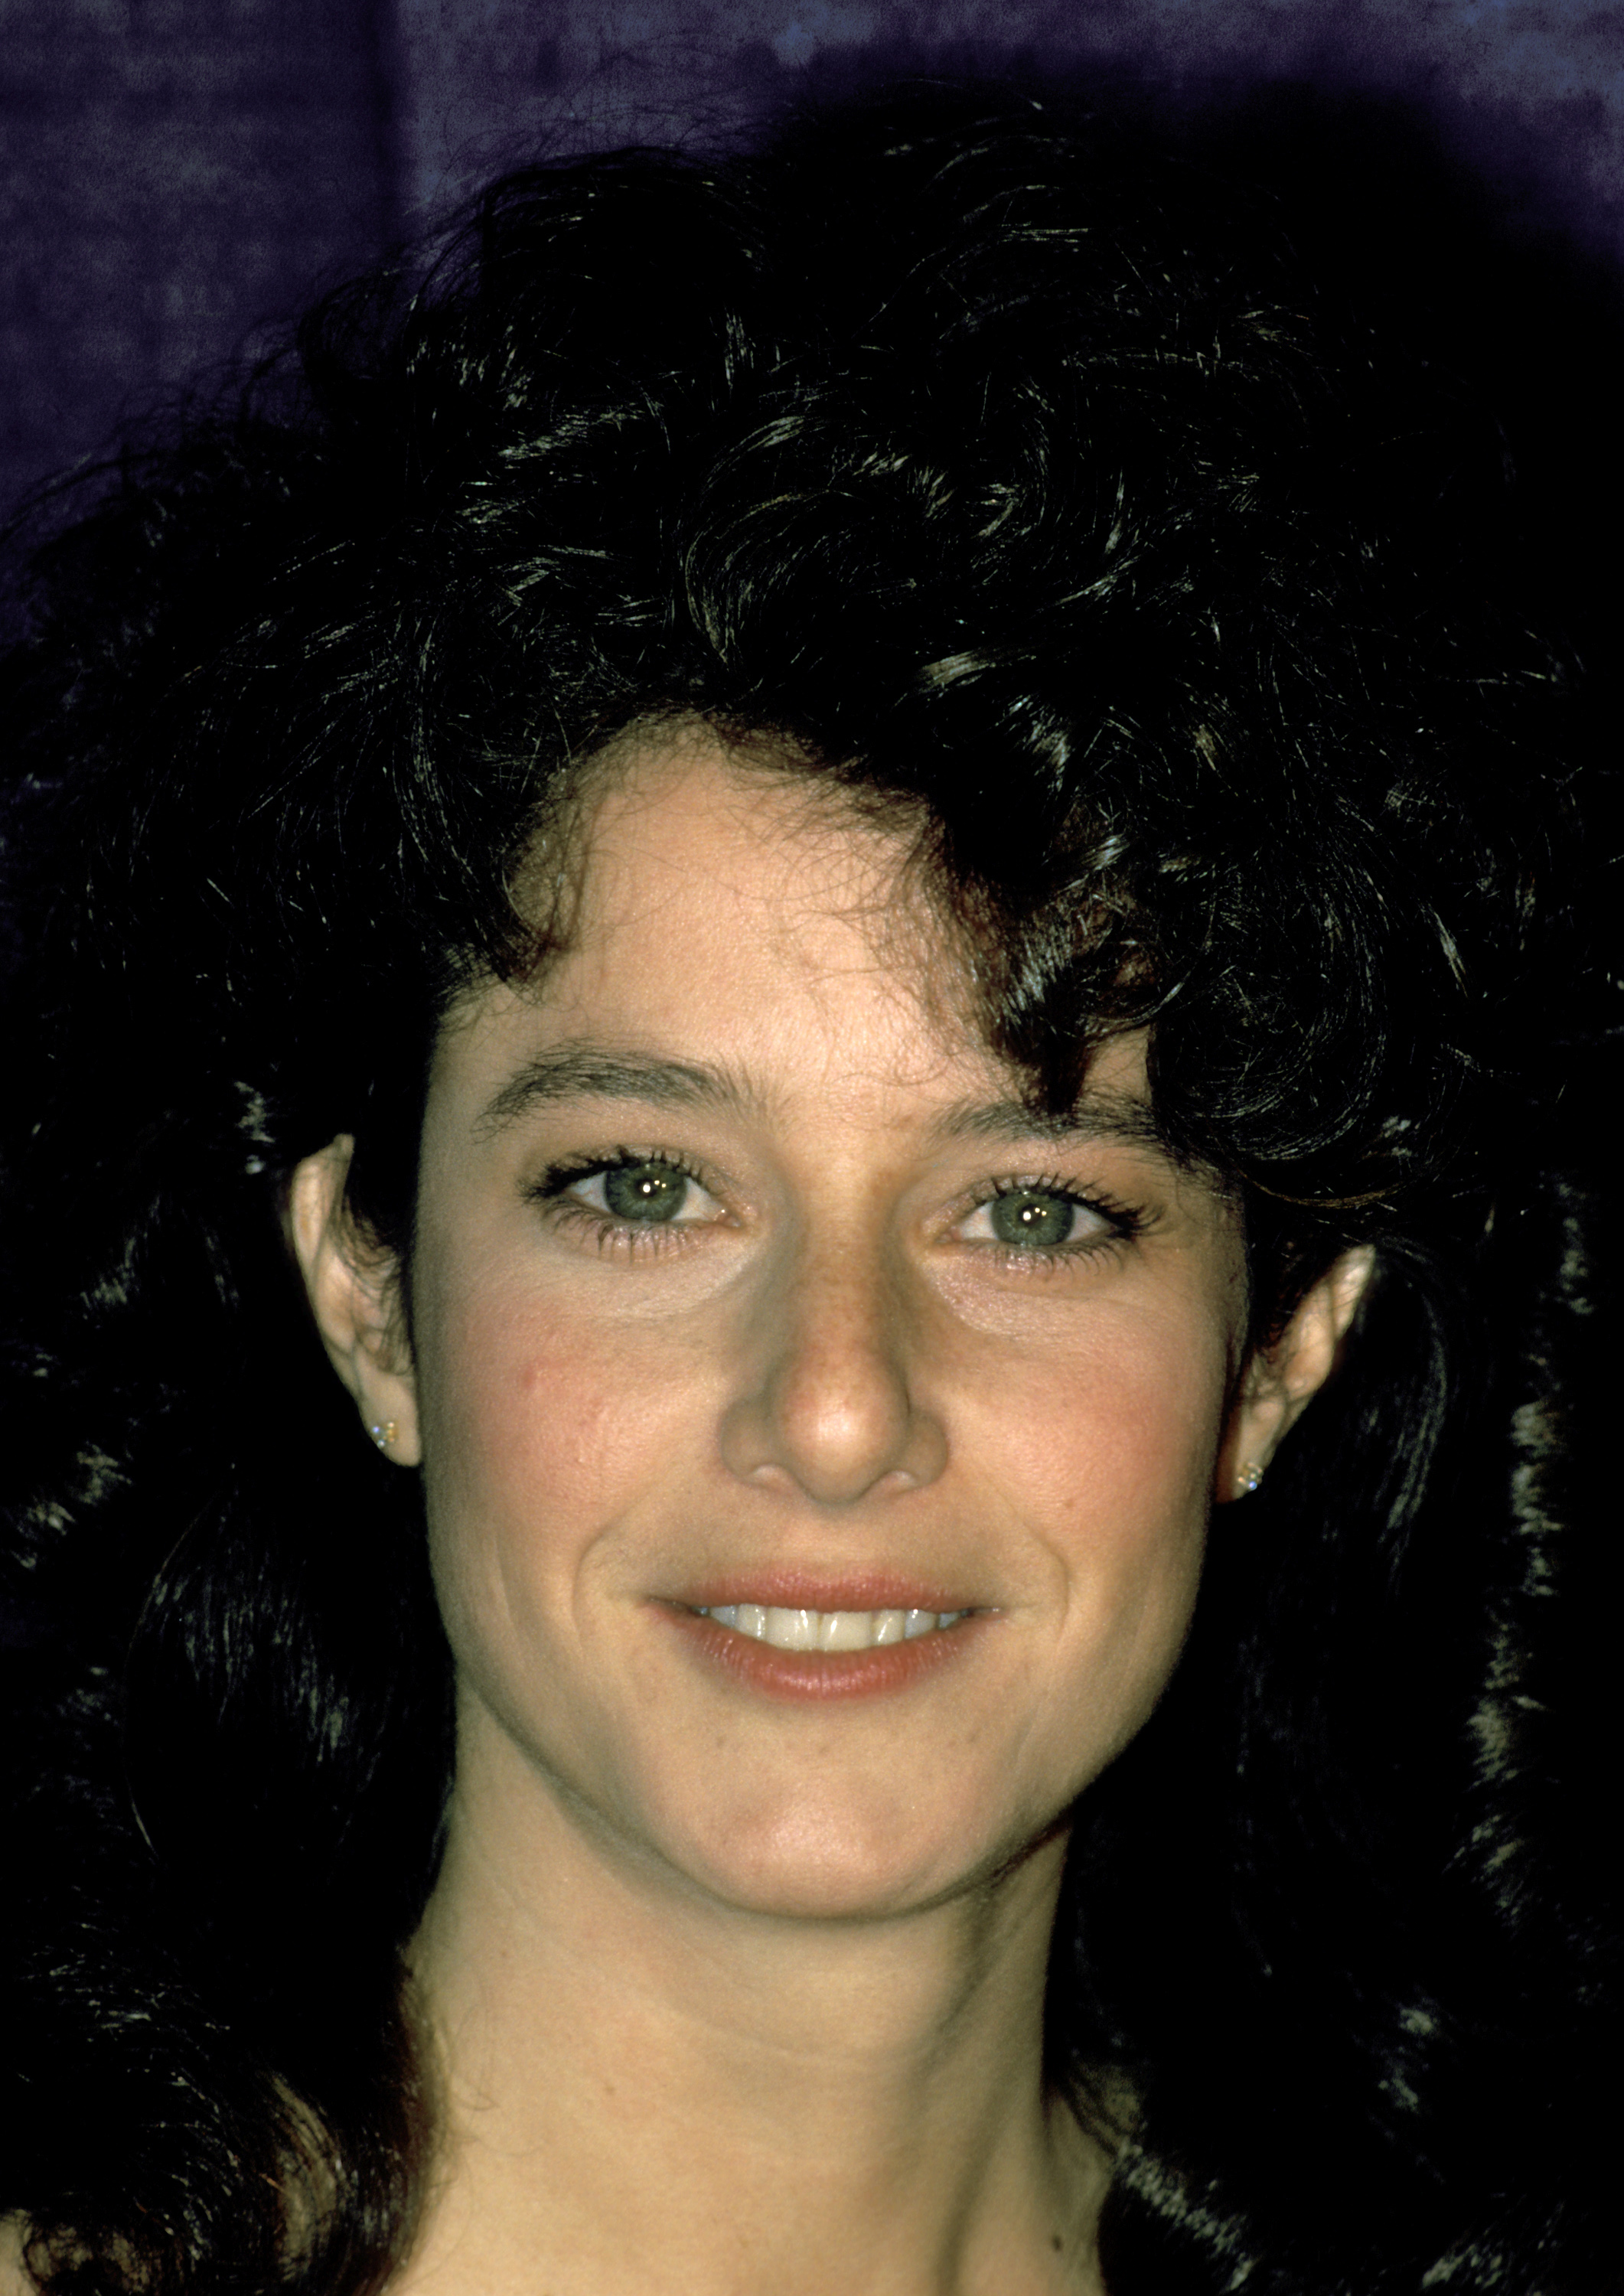 Debra Winger attends the National Association of Theater Owners Annual Convention at Sheraton Hotel on November 3, 1984, in Washington, District of Columbia. | Source: Getty Images